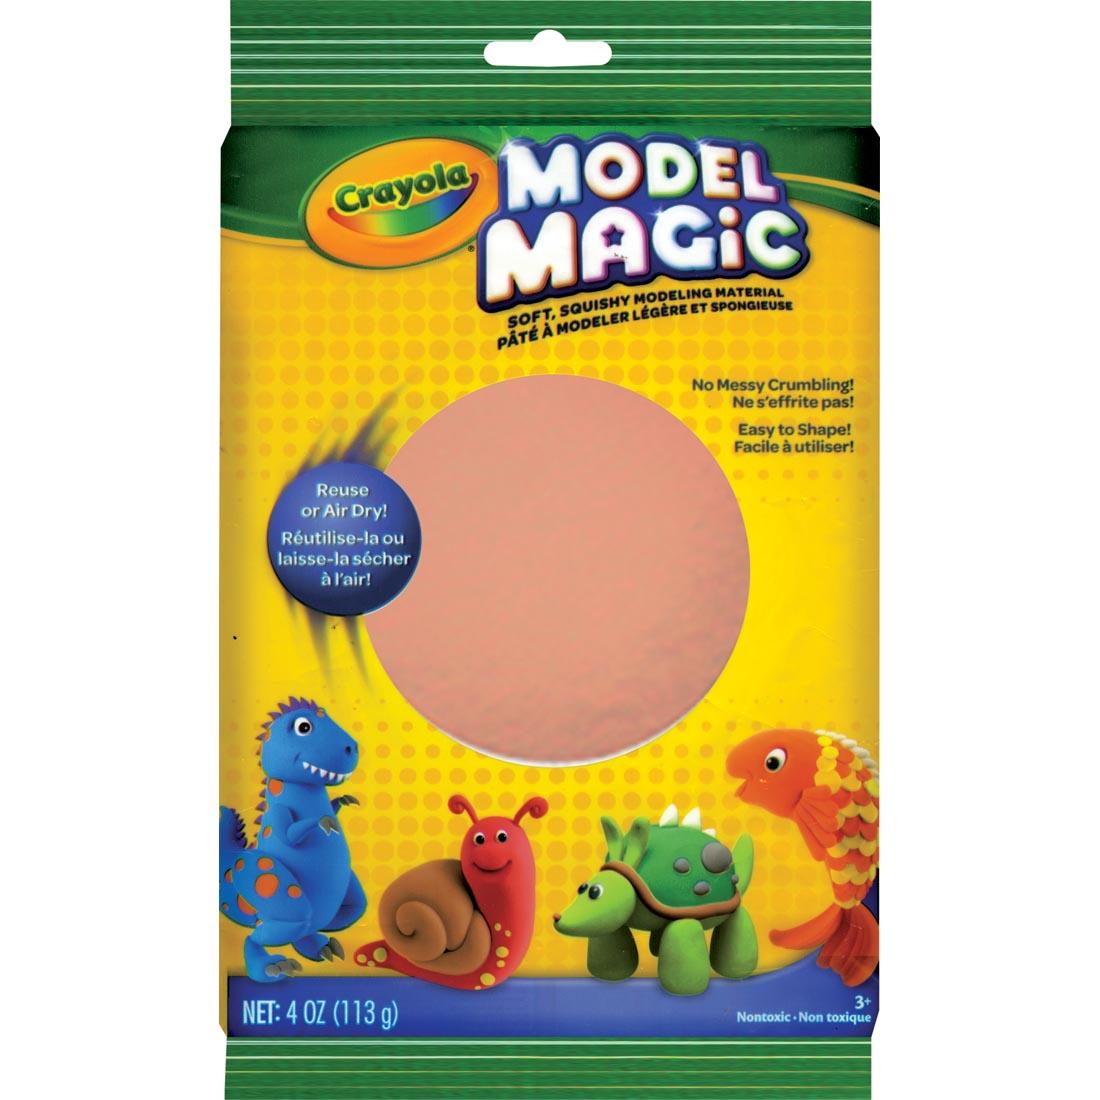 Package of Bisque Crayola Model Magic